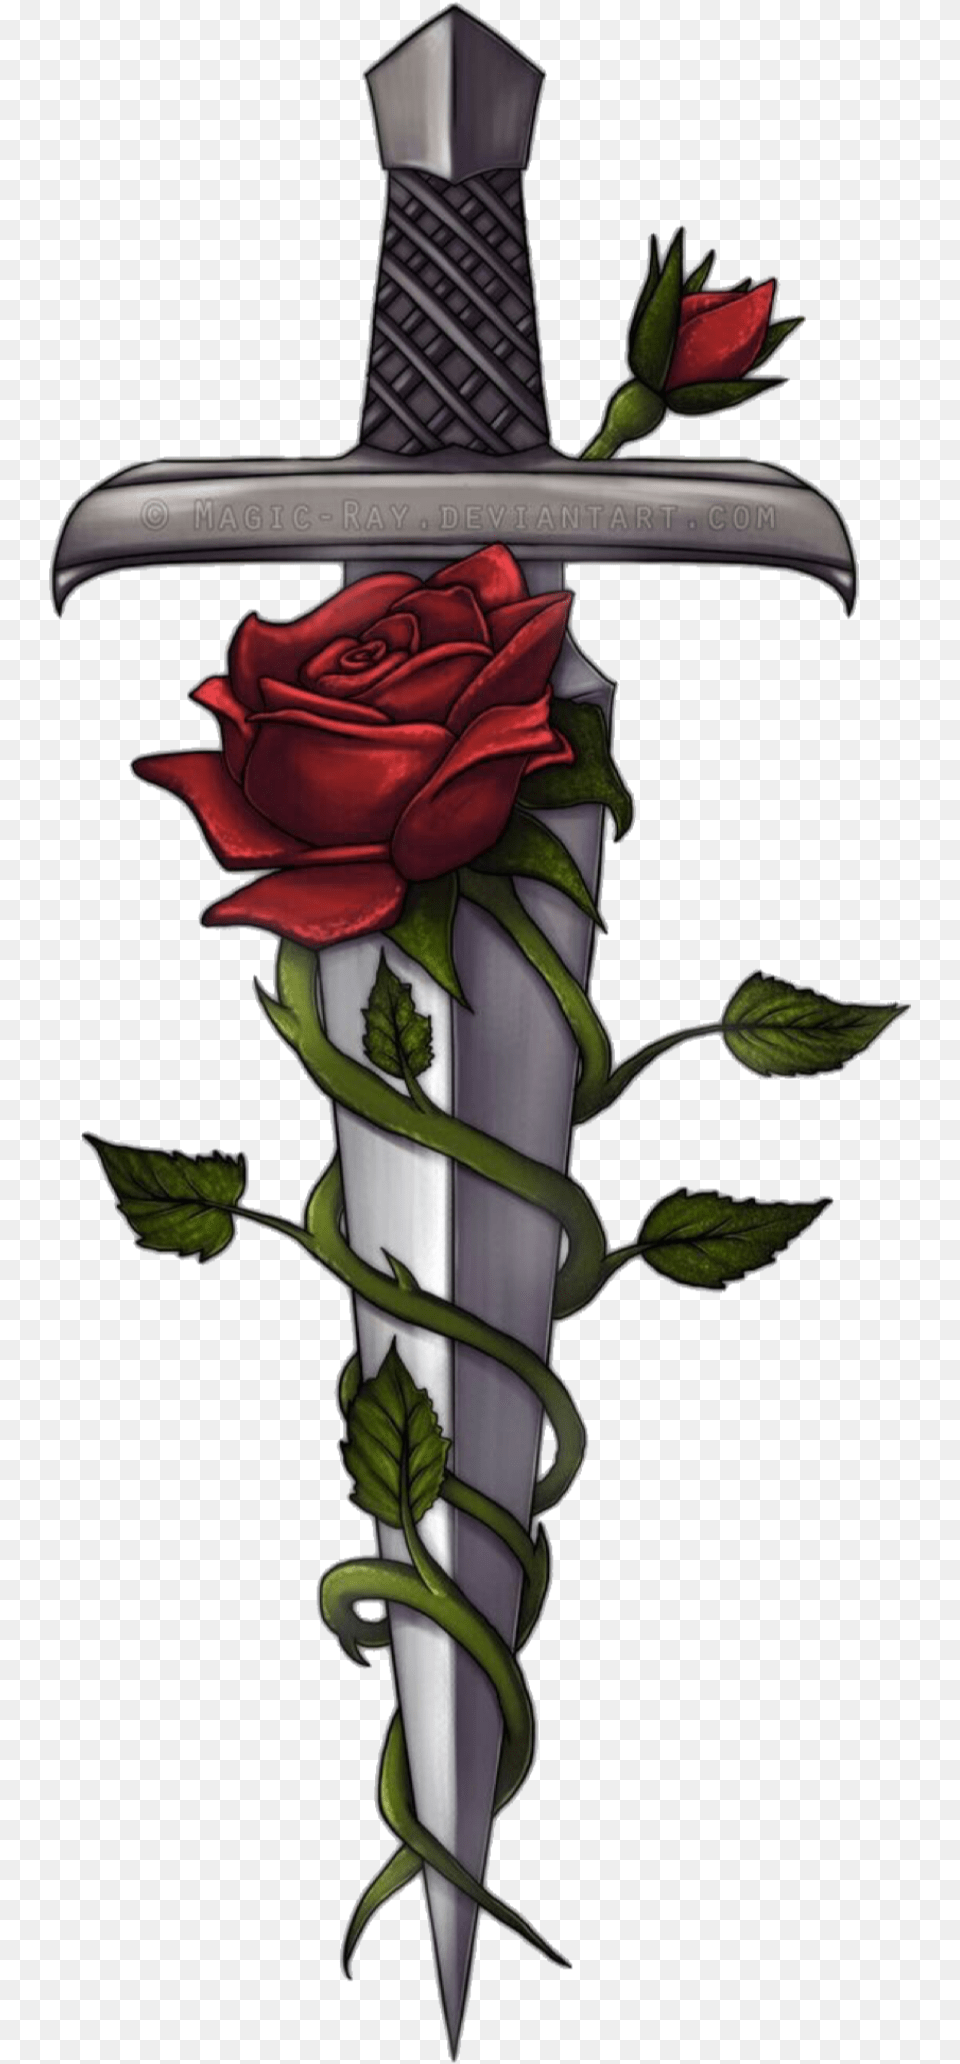 Dagger Knife Rose Vine Thorns Stab Cut Poke Rose And Sword Tattoo, Blade, Flower, Plant, Weapon Free Png Download